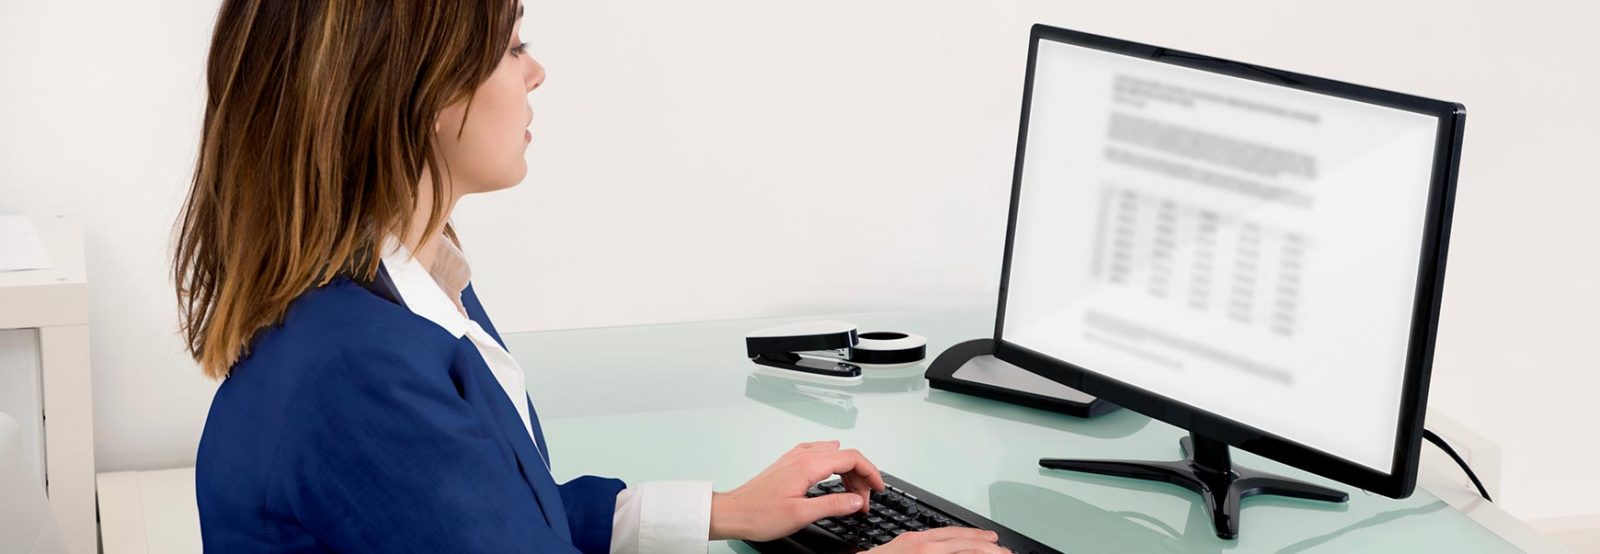 The picture shows a woman dressed in a blazer at a desk in front of a computer.